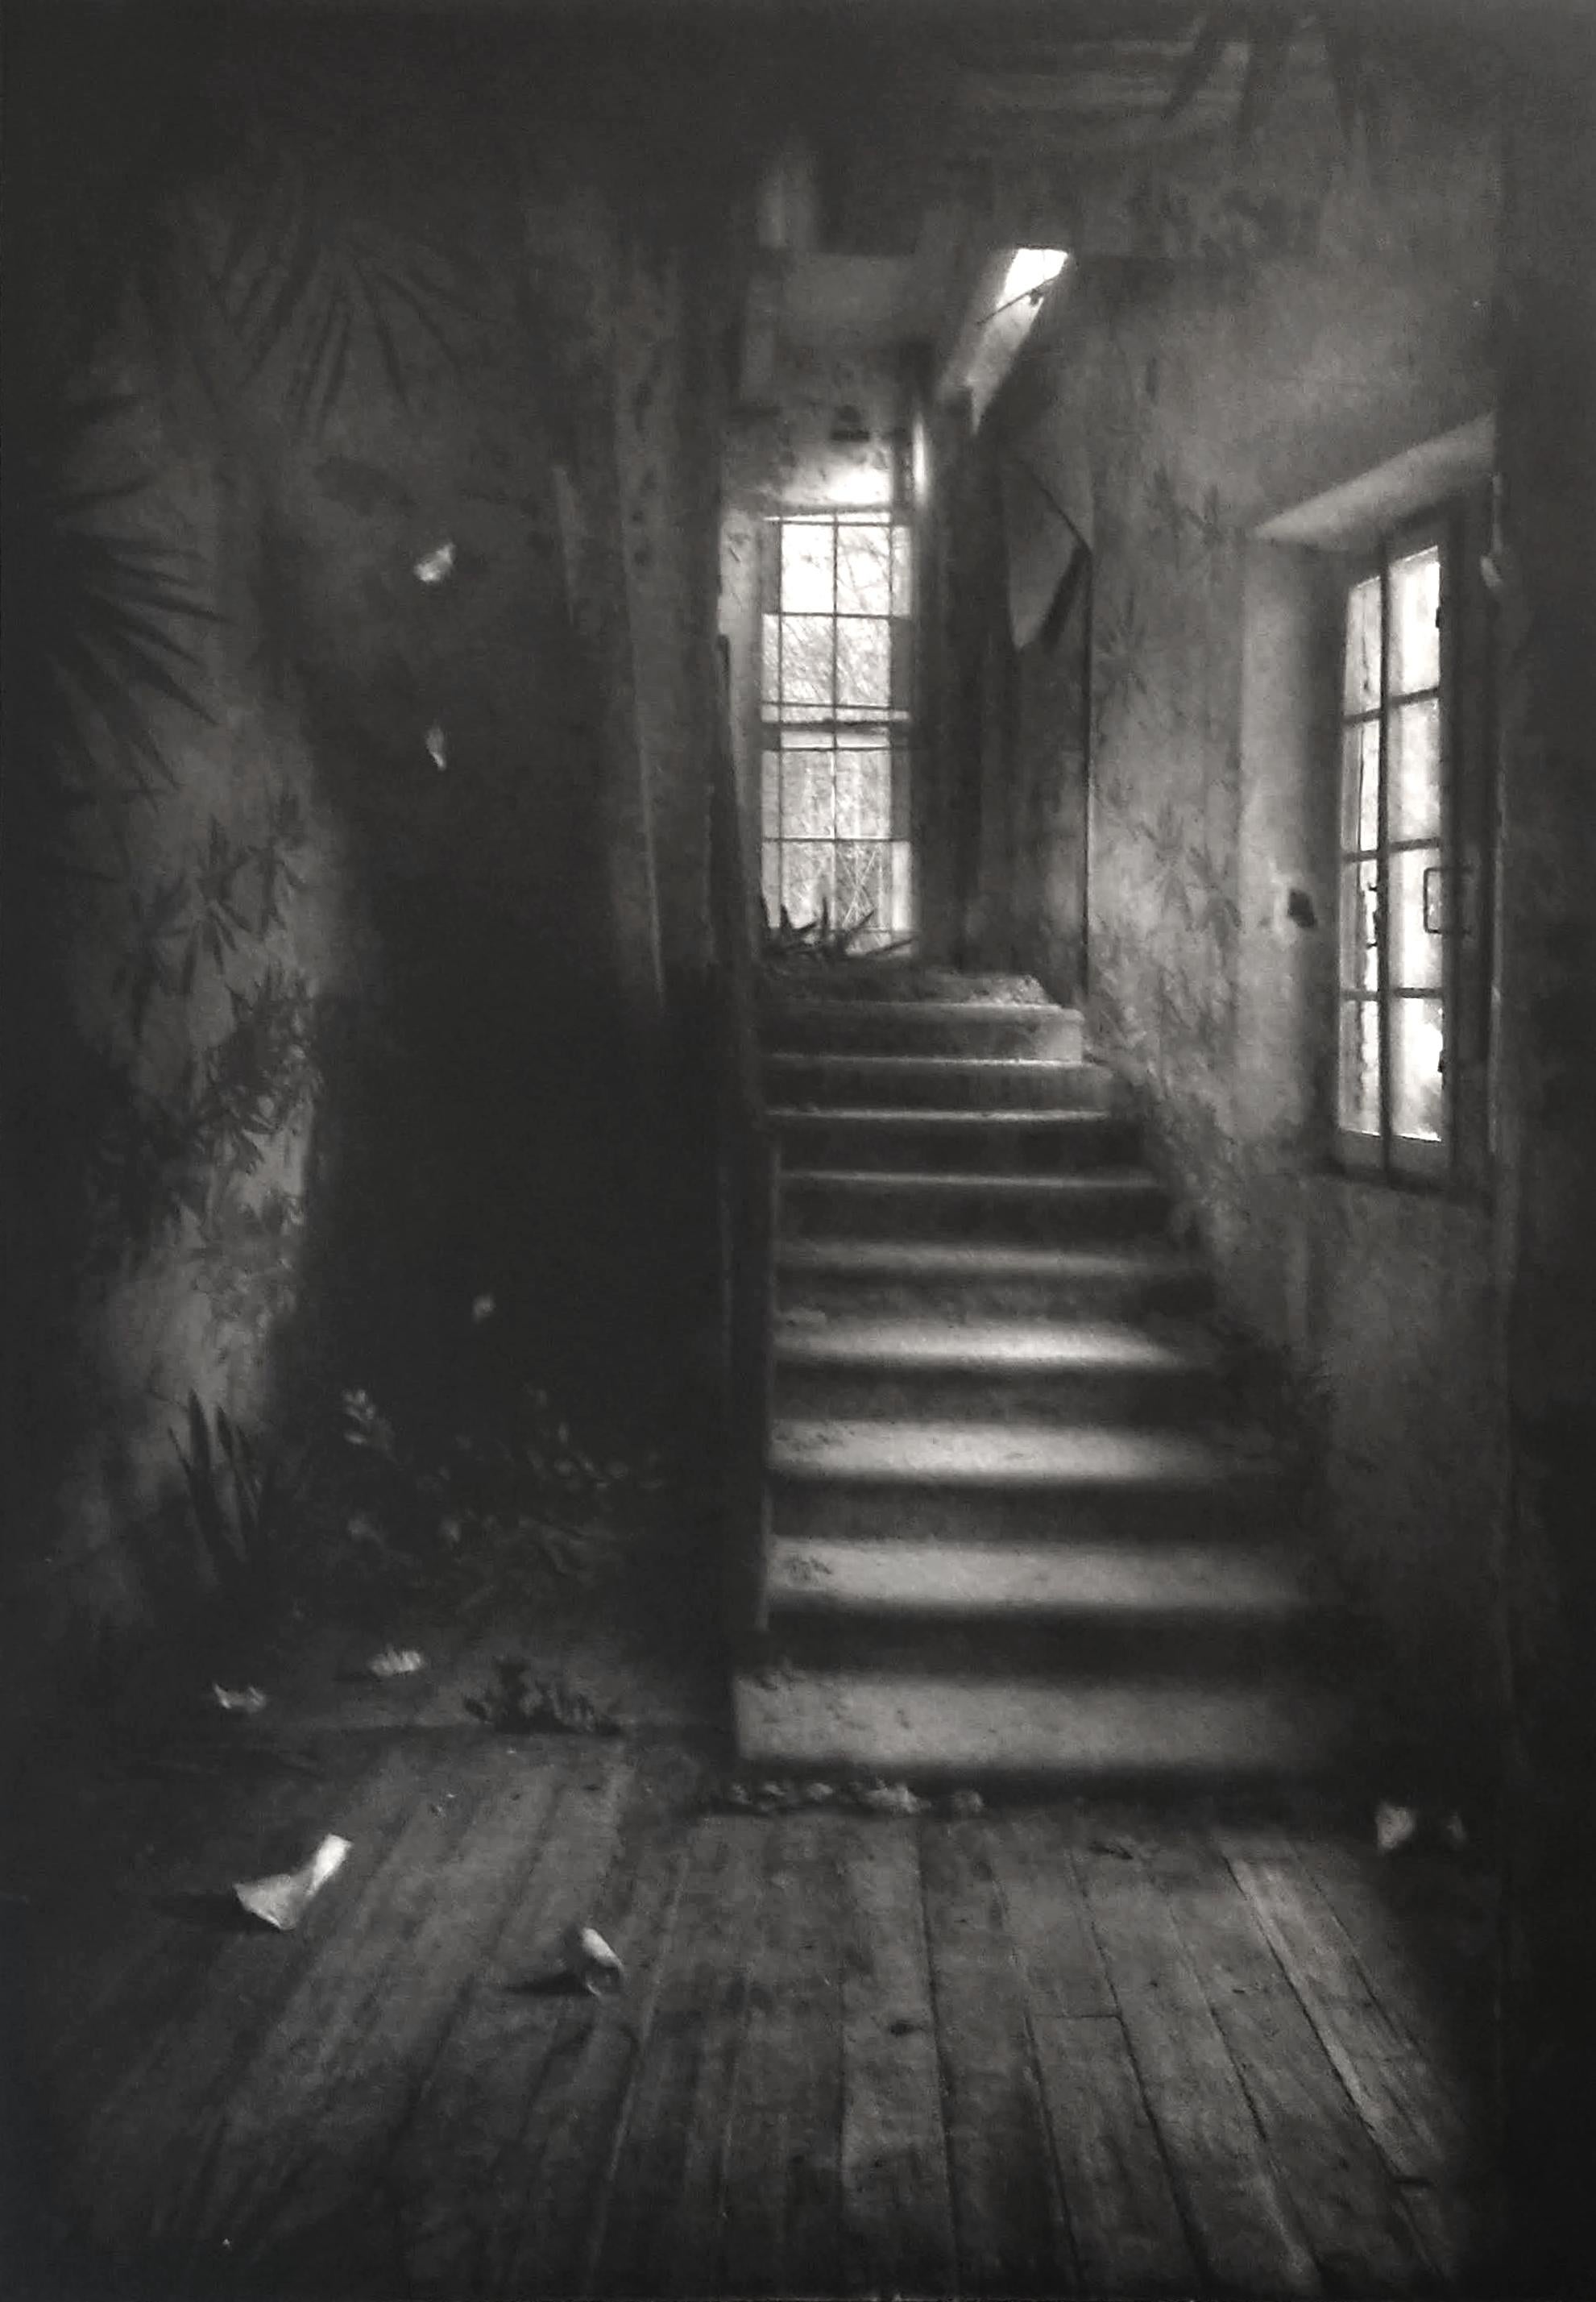 Suzanne Moxhay Black and White Photograph - Stairway with Vegetation, Interior Staircase, Photomontage, Gravure, Etching